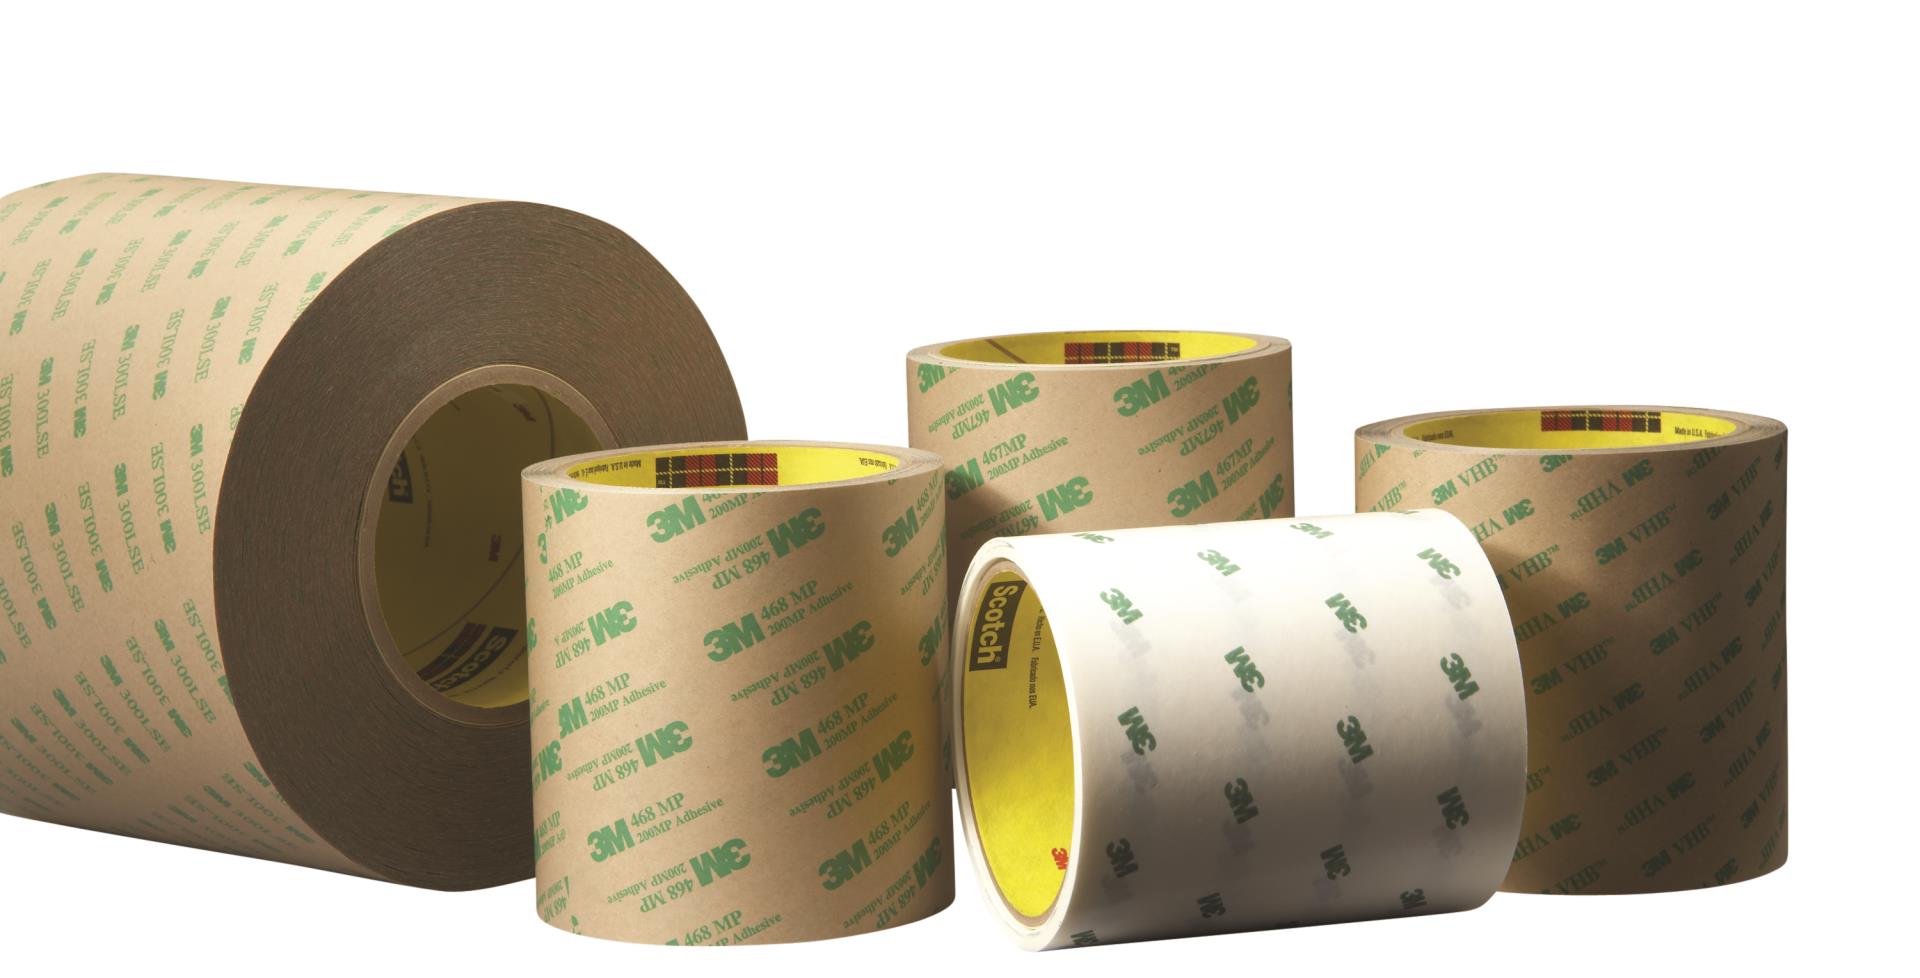 CS Hyde 19-5R UHMW .005 Mil Tape with Rubber Adhesive 7.5 x 36 Yards